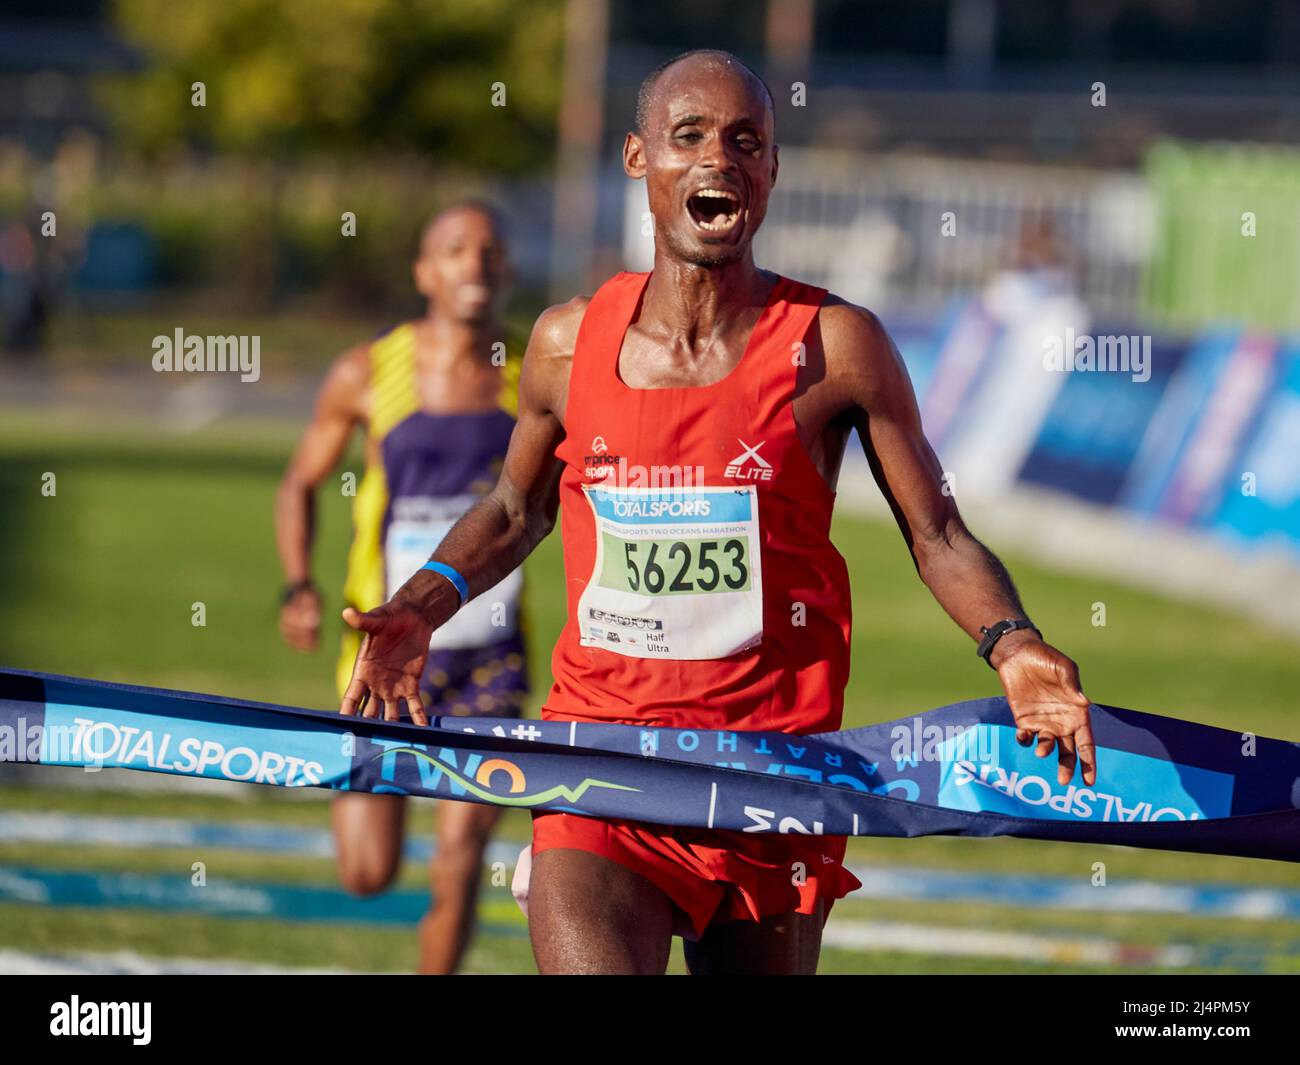 Cape Town, South Africa, 16th Apr 2022. Edndale Belachew, Mens Winner surges ahead of Nkosikhona Mhlakwana, in a sprint finish to the end. MO Bassa/Alamay Live News Stock Photo